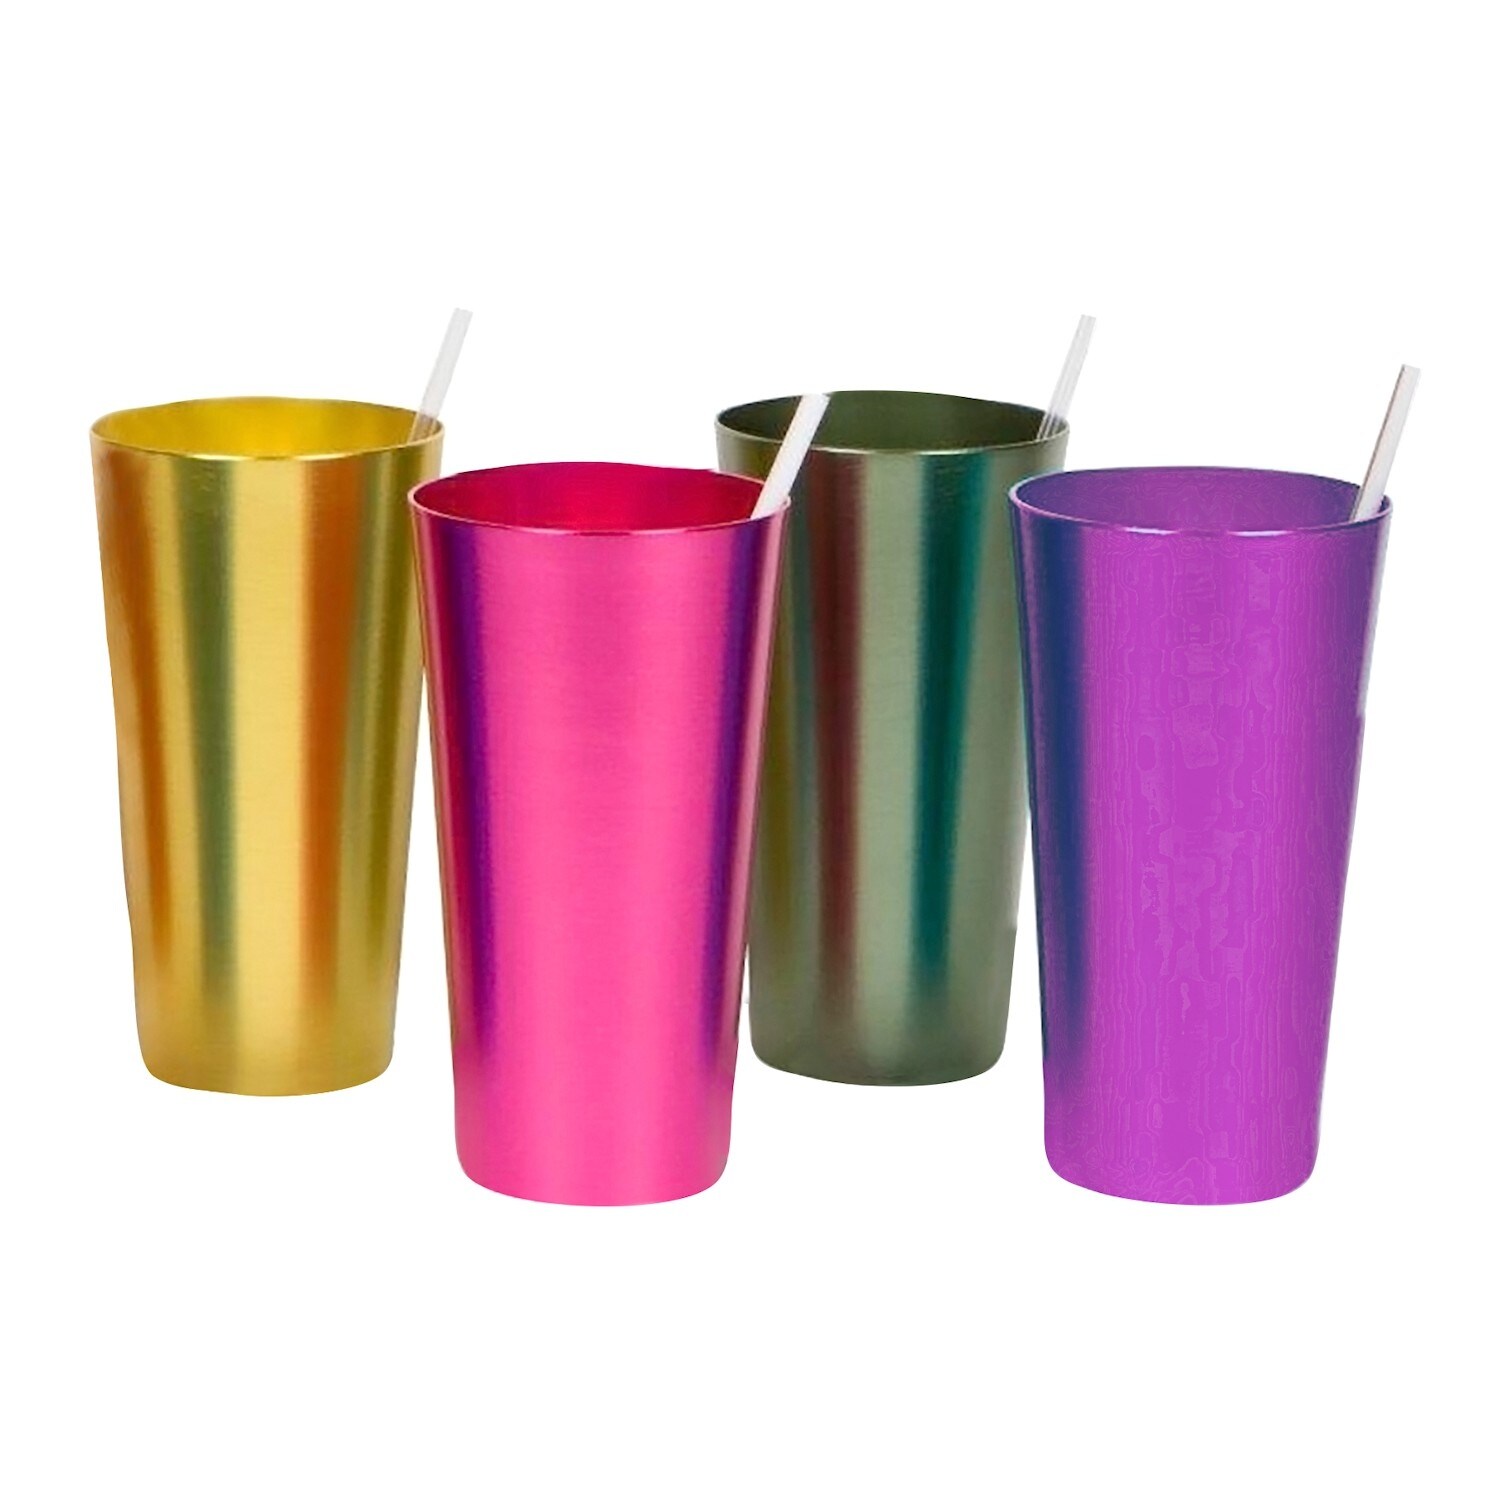 https://ak1.ostkcdn.com/images/products/is/images/direct/8feb70e5e044606992ab0c1c66a5e59318540e2c/Aluminum-Tumblers---16-Ounce---Set-of-4-Different-Vintage-Style-Colored-Metal-Cups.jpg